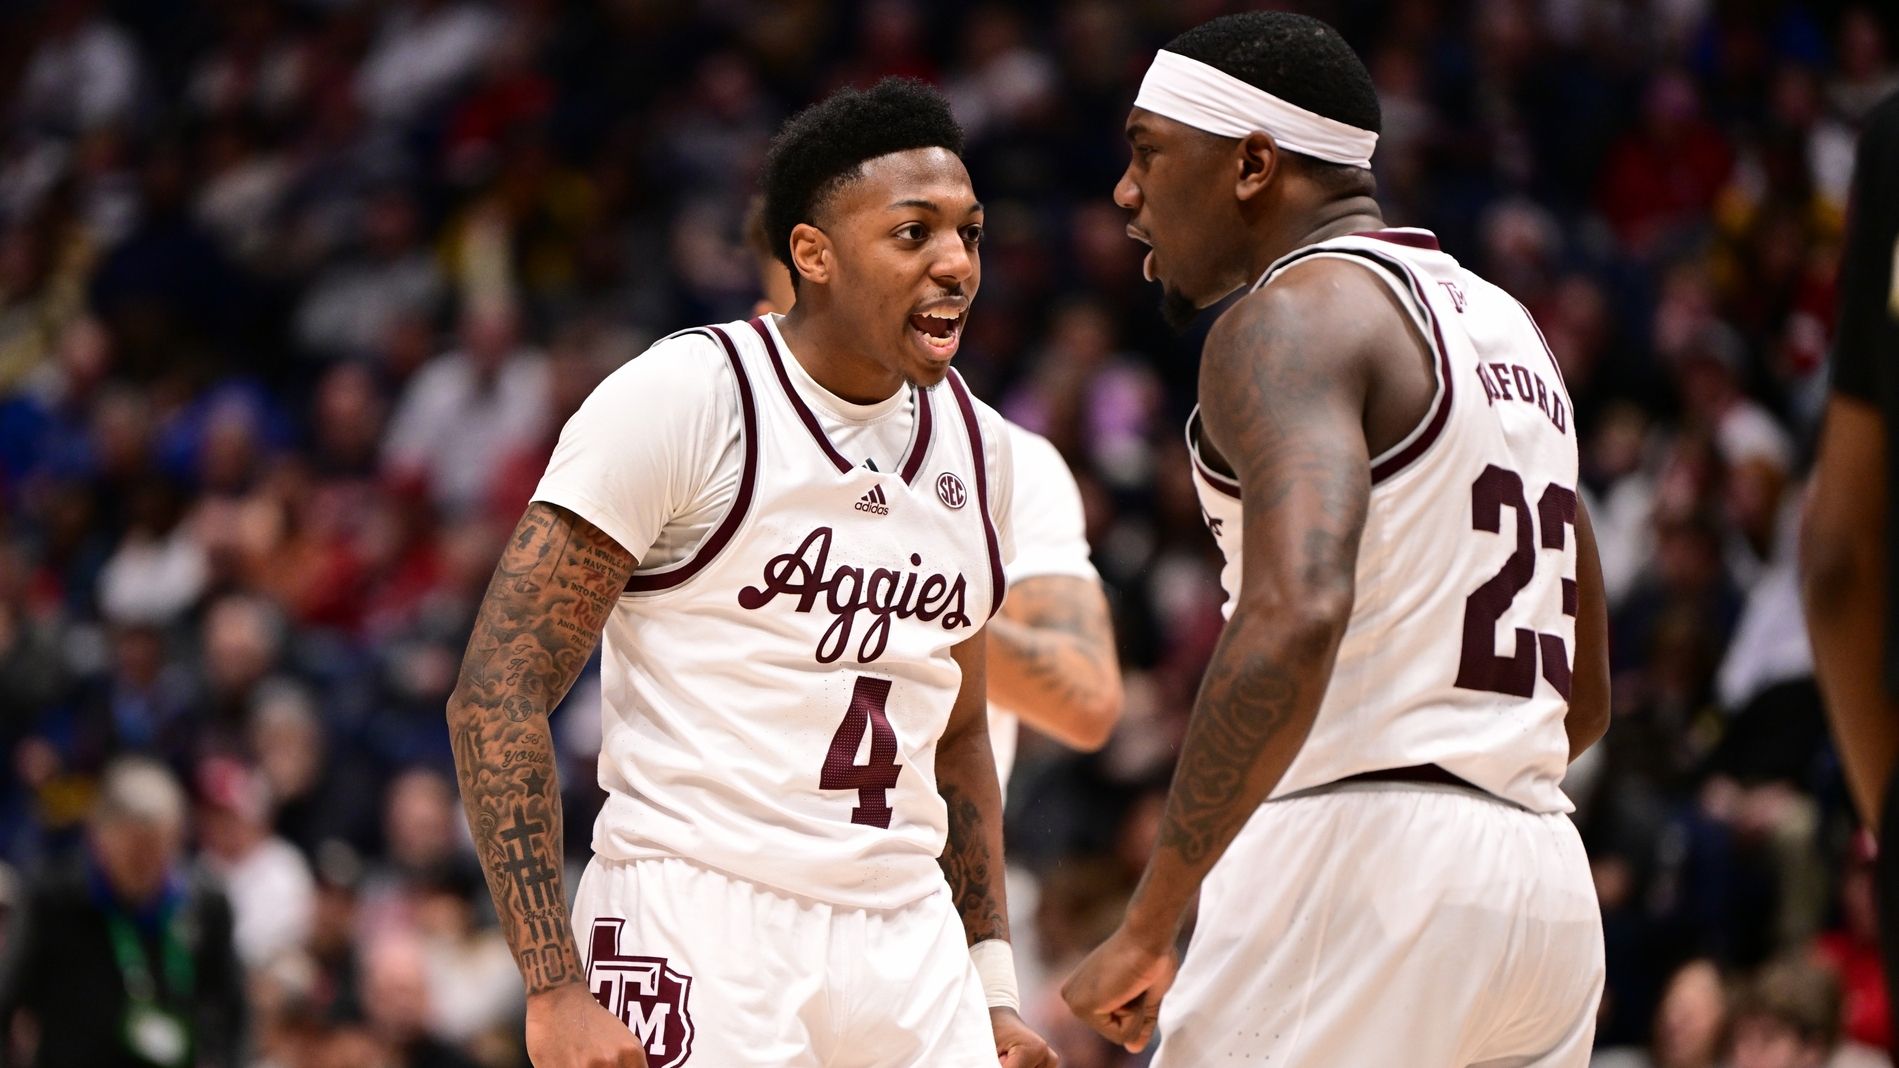 Taylor IV leads Aggies' fiery offense to defeat Vandy